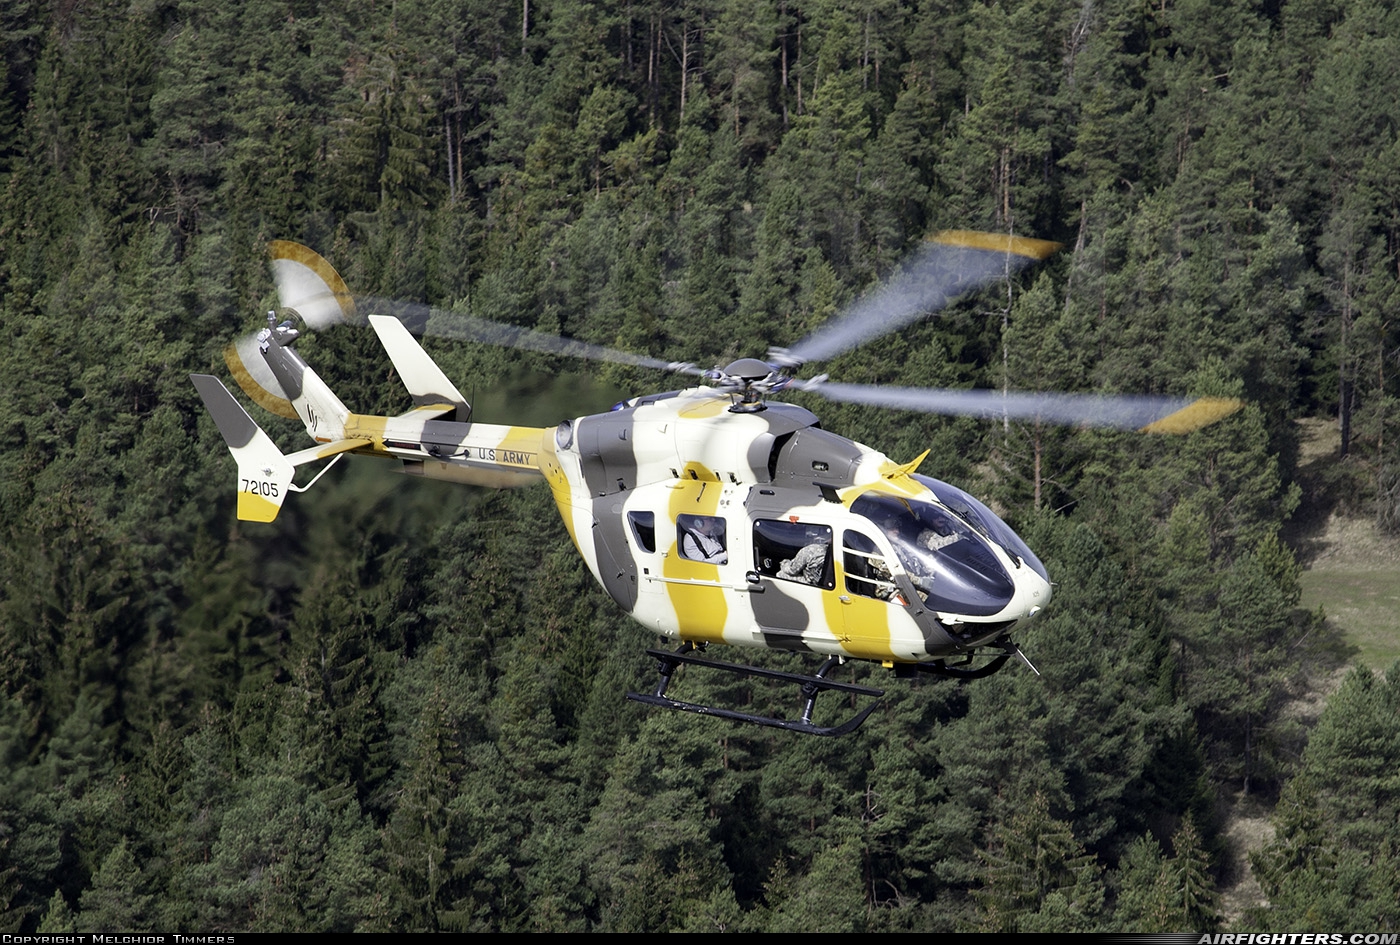 USA - Army Eurocopter UH-72A Lakota 09-72105 at In Flight, Germany